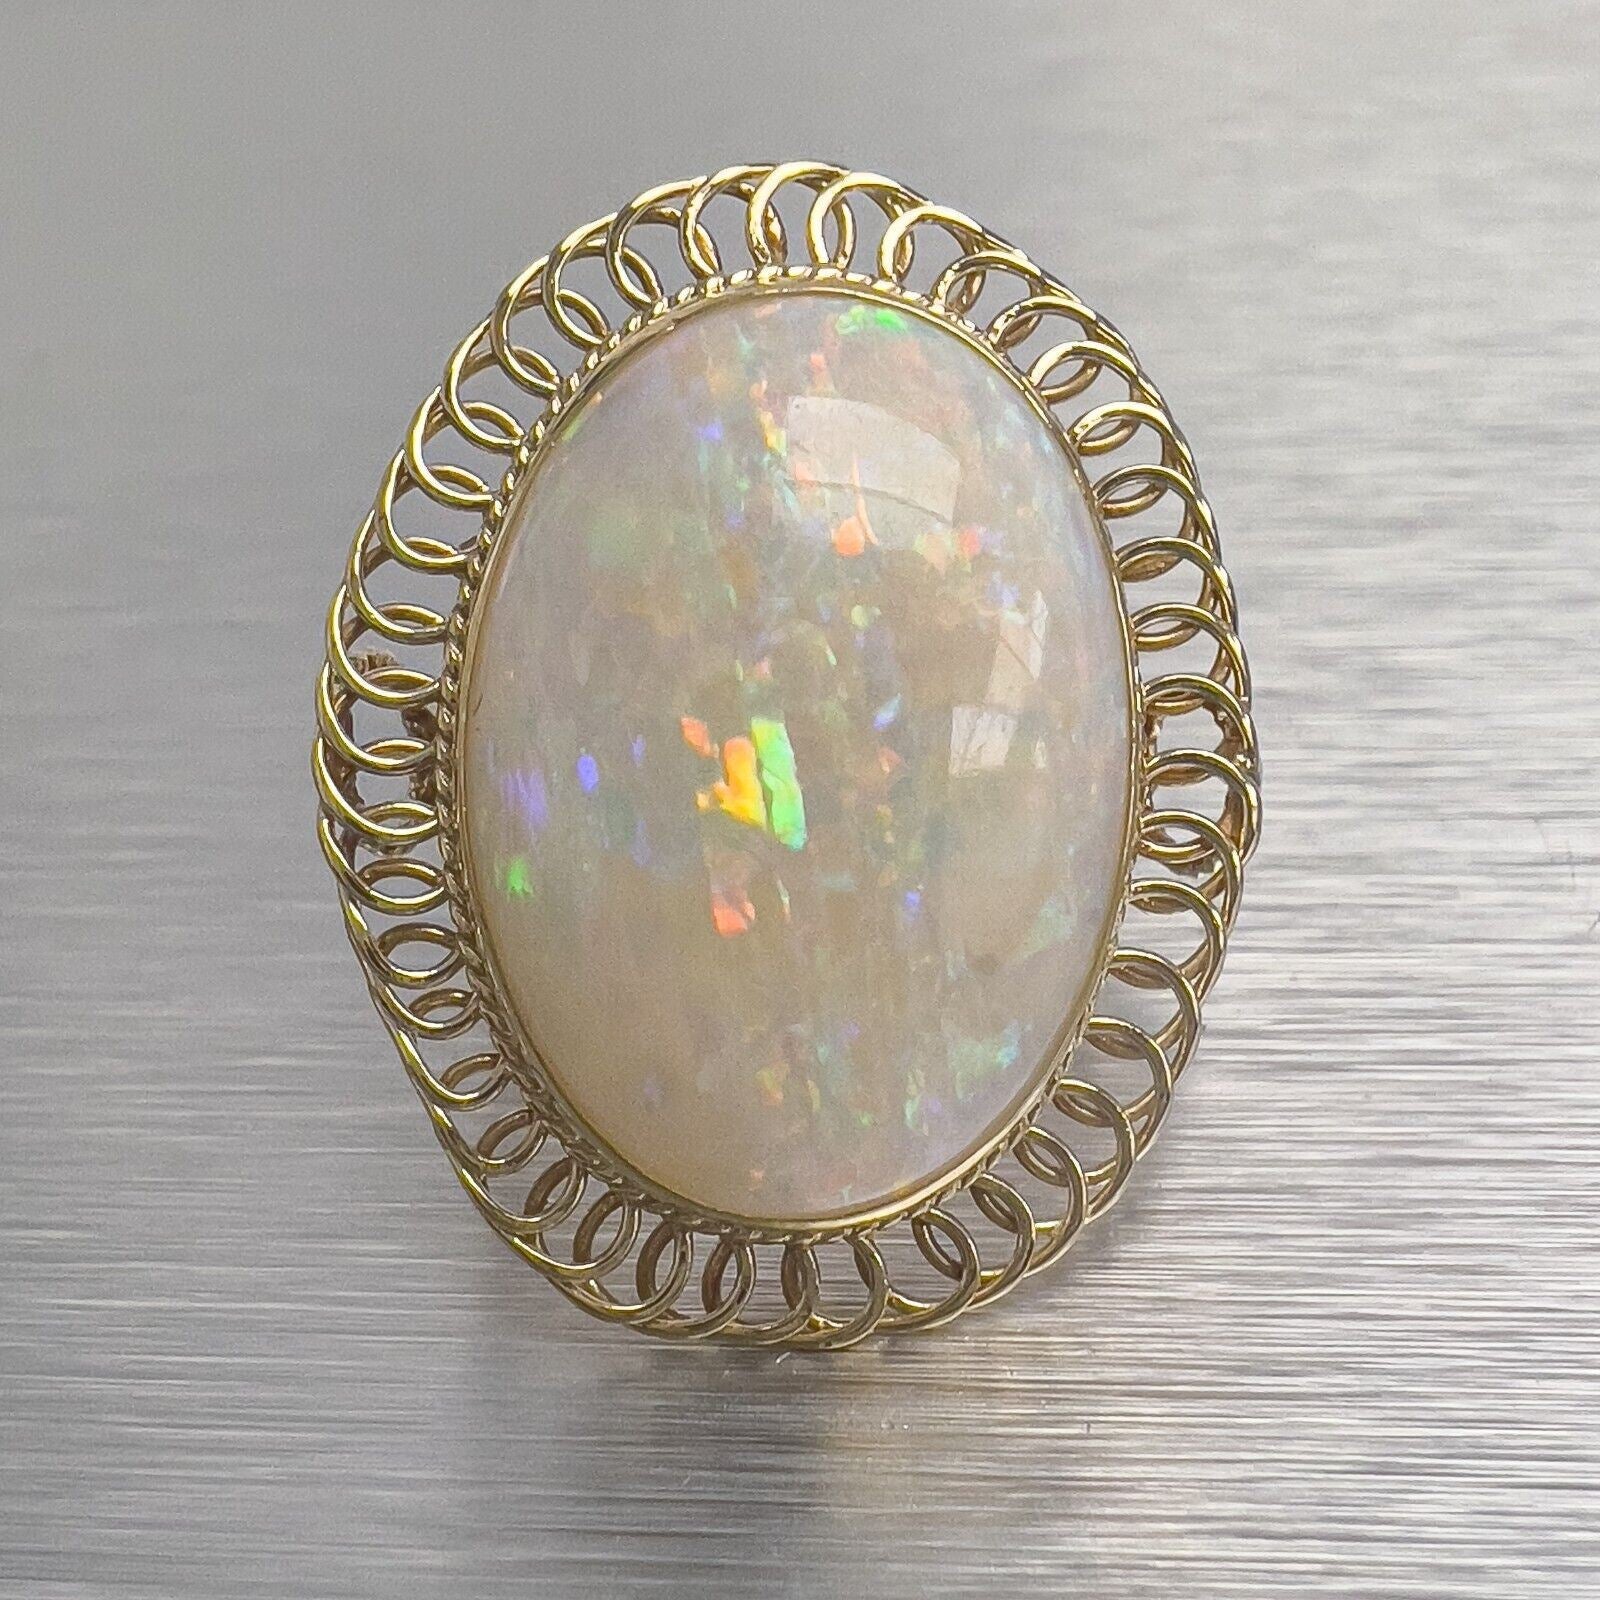 Antique Victorian 14k Yellow Gold Cabochon Opal Spiral Wire Halo Ring Size 4.75